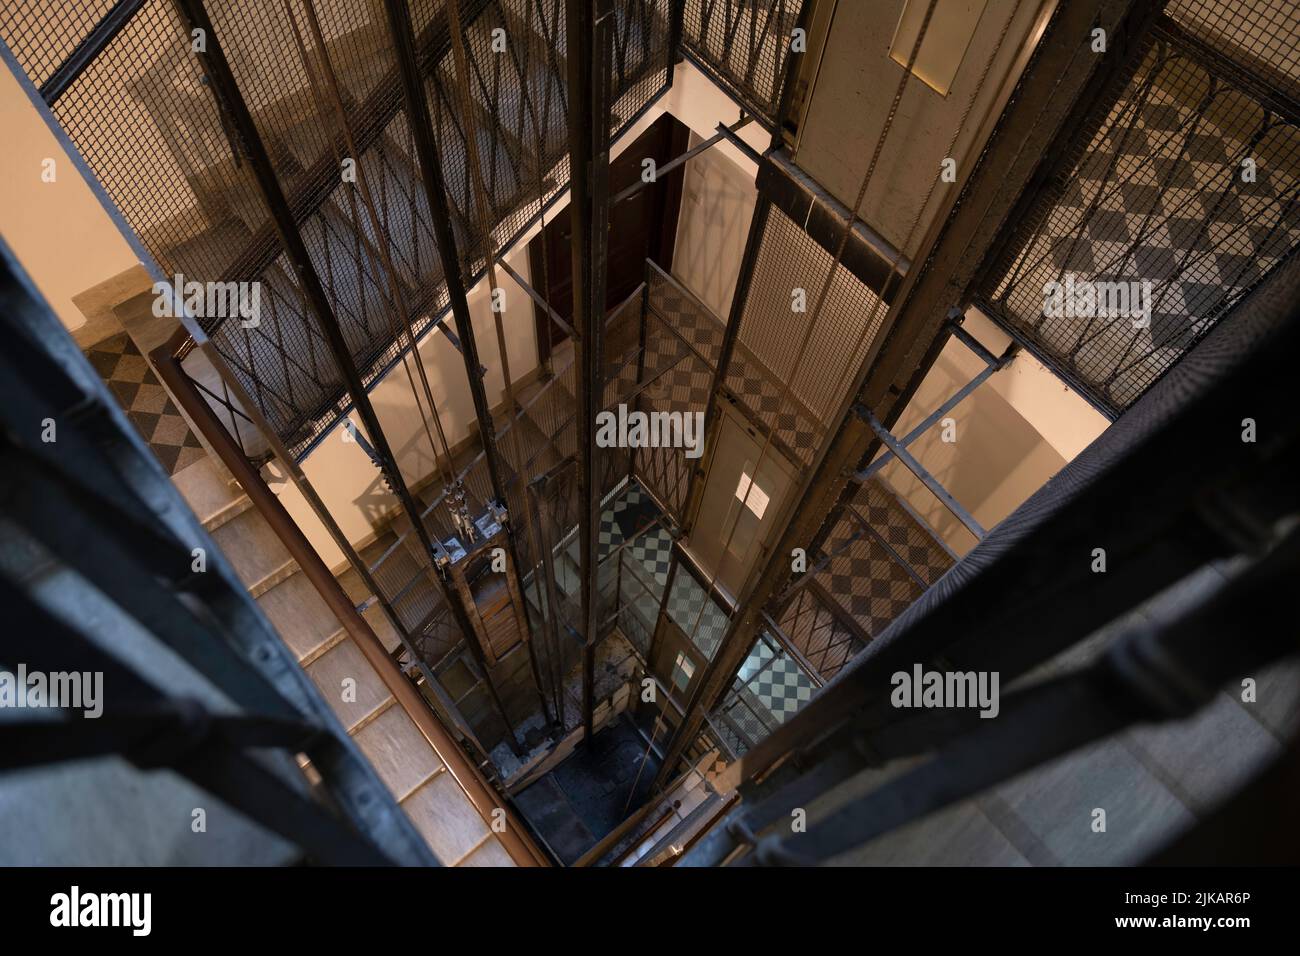 Dramatic shot of a stairwell looking into an elevator shaft with metal rods, cables and cabin in a vintage apartment building in Rome Stock Photo